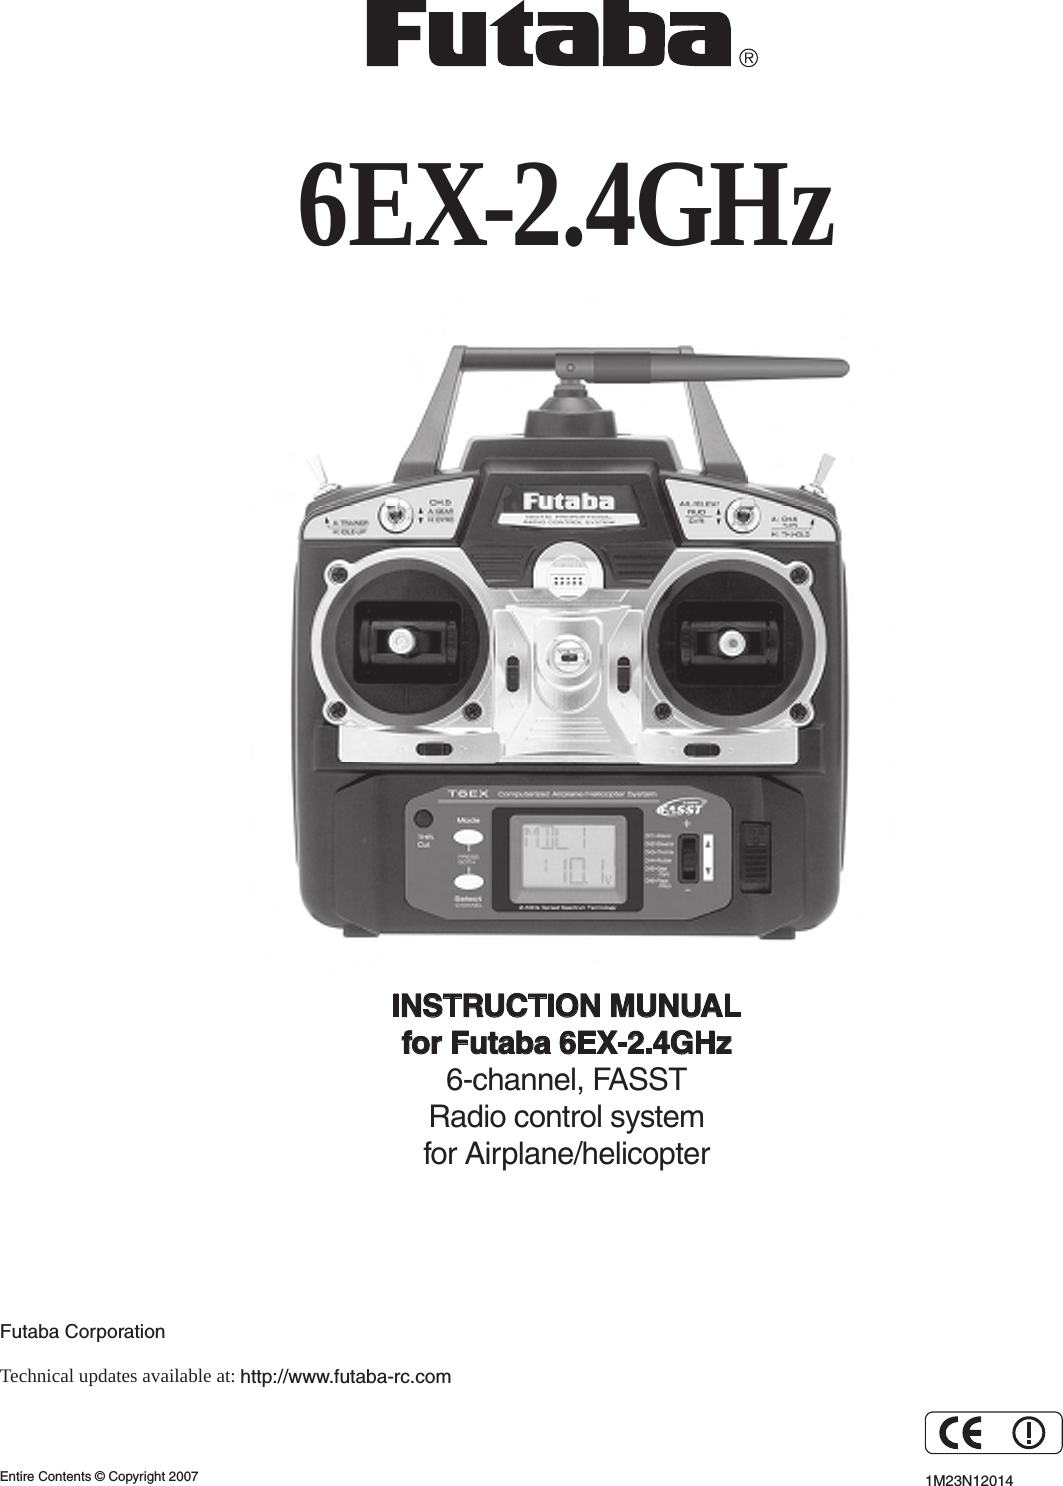 6EX-2.4GHzINSTRUCTION MUNUALfor Futaba 6EX-2.4GHz6-channel, FASSTRadio control systemfor Airplane/helicopter1M23N12014Futaba CorporationTechnical updates available at: http://www.futaba-rc.comEntire Contents © Copyright 2007